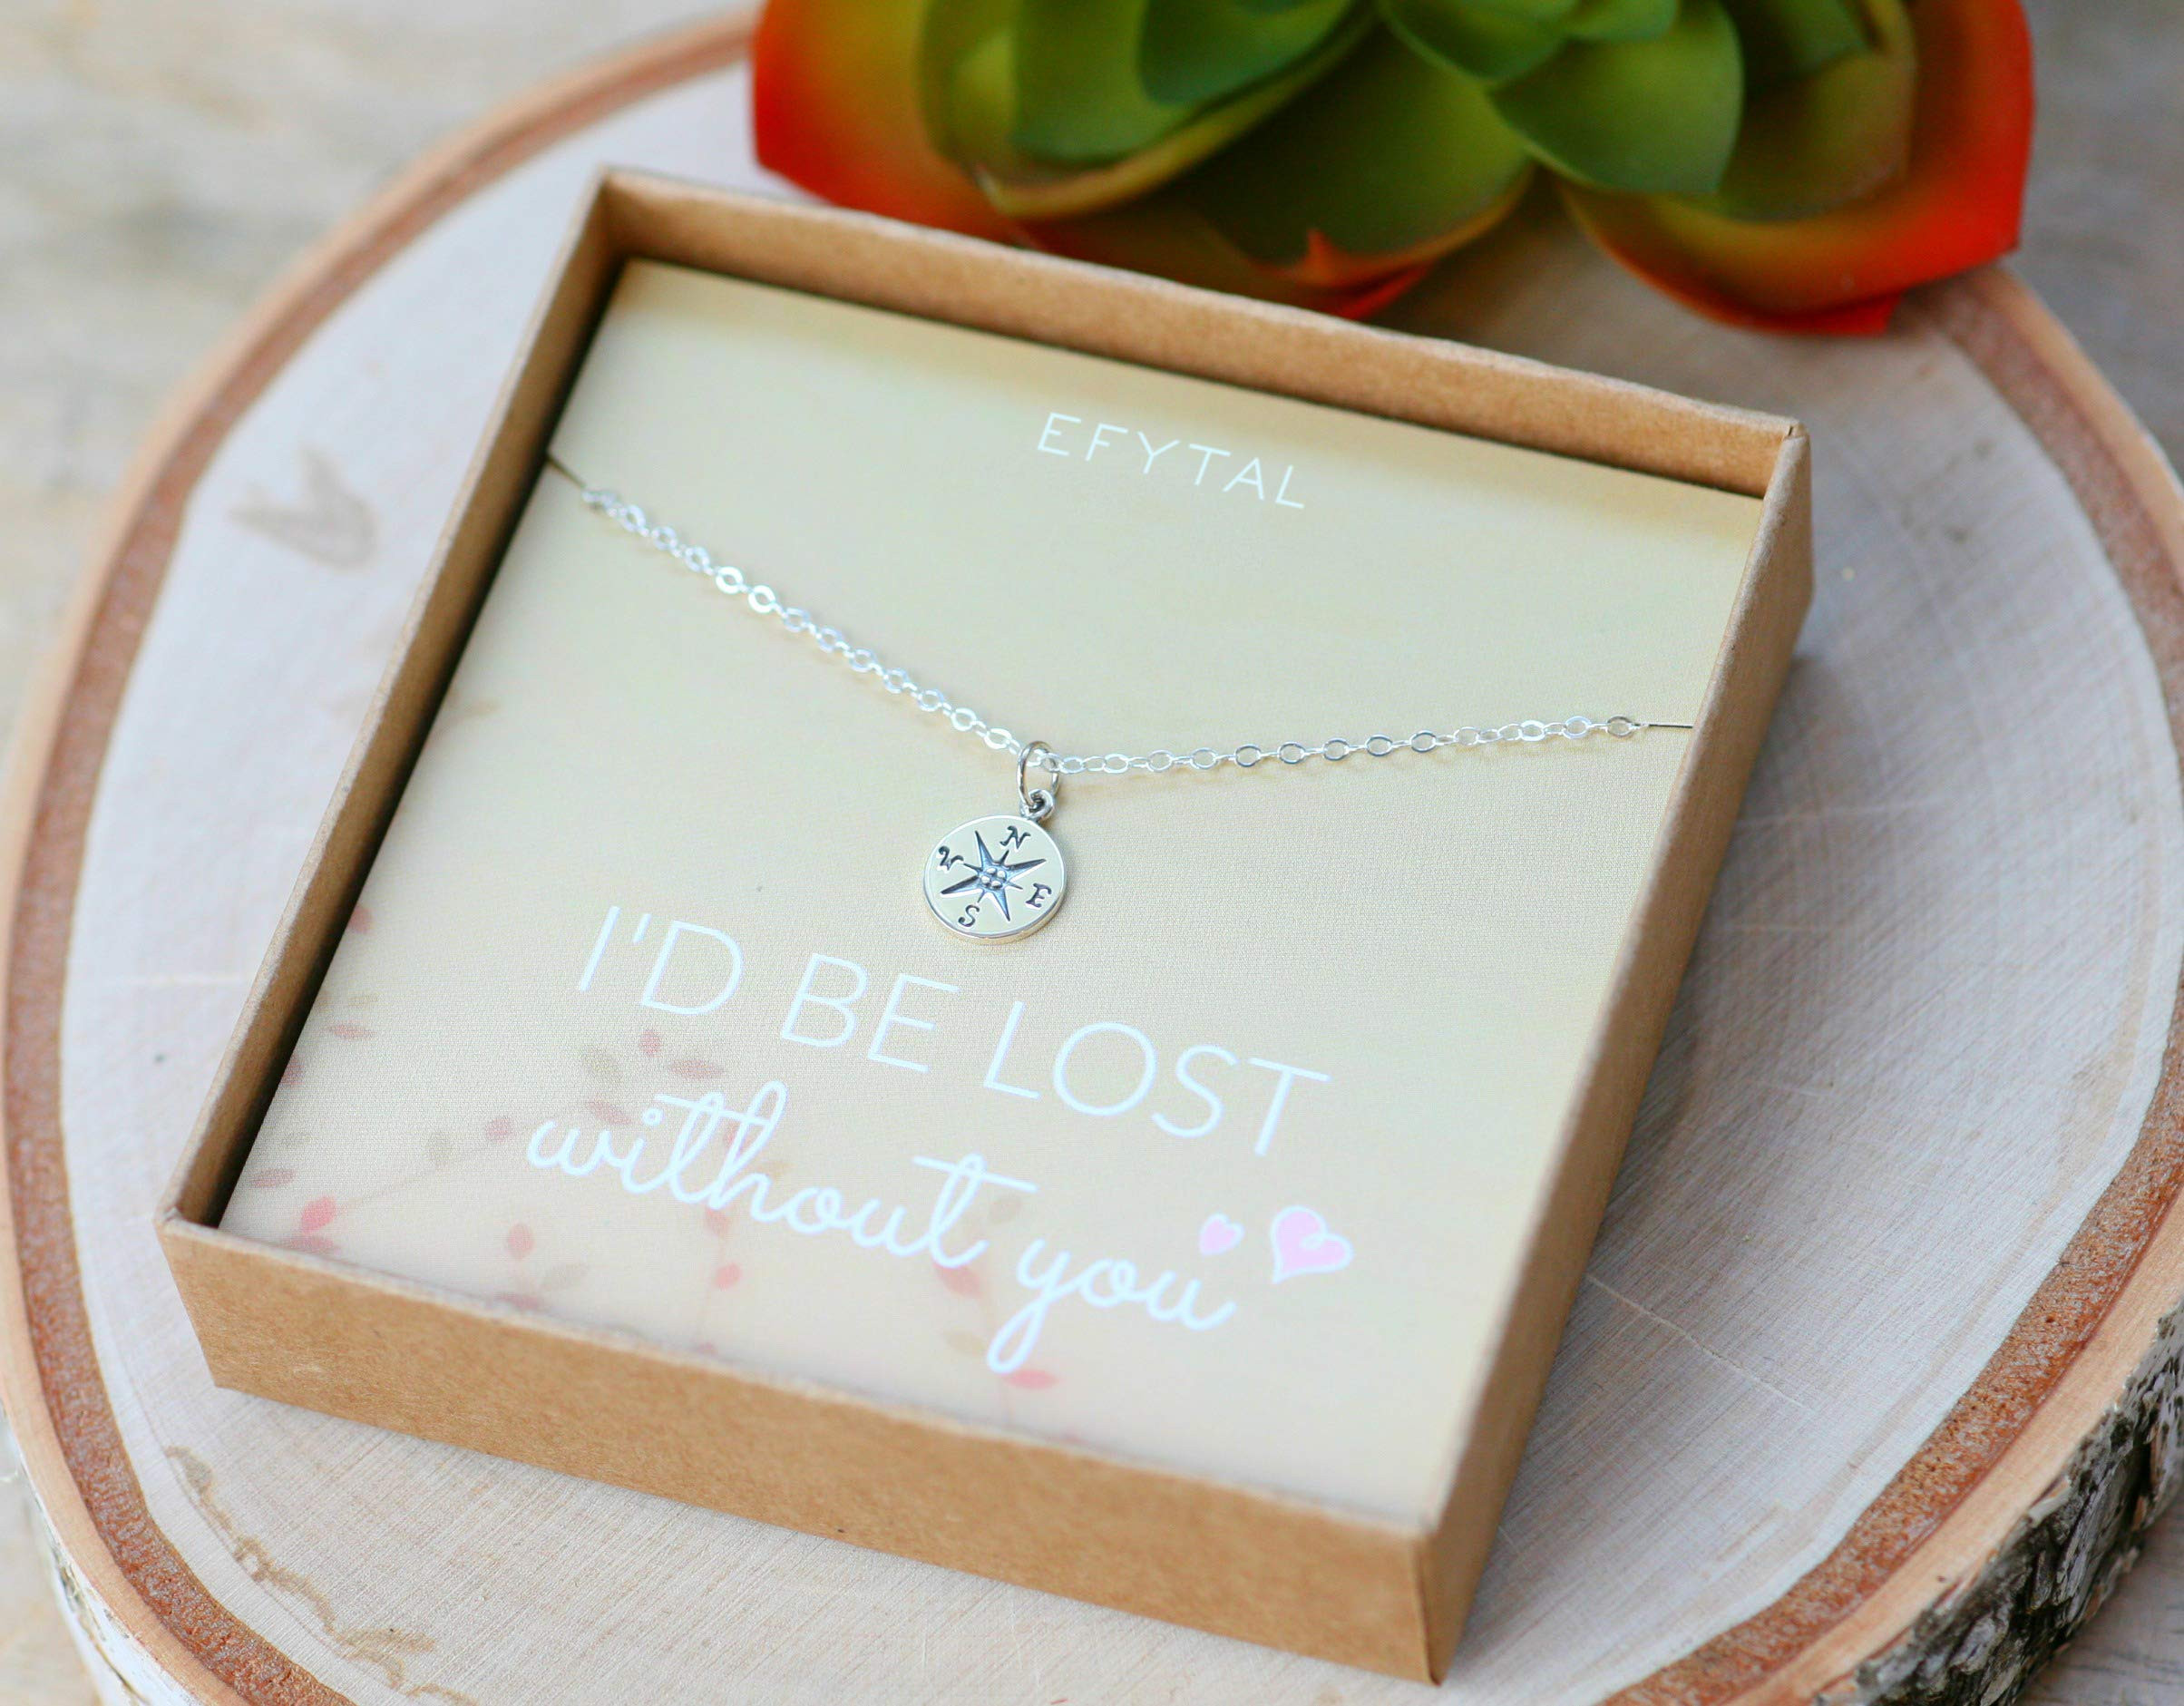 Jewelry Gift Ideas For Girlfriend
 EFYTAL Necklace Gift for Girlfriend Wife Sterling